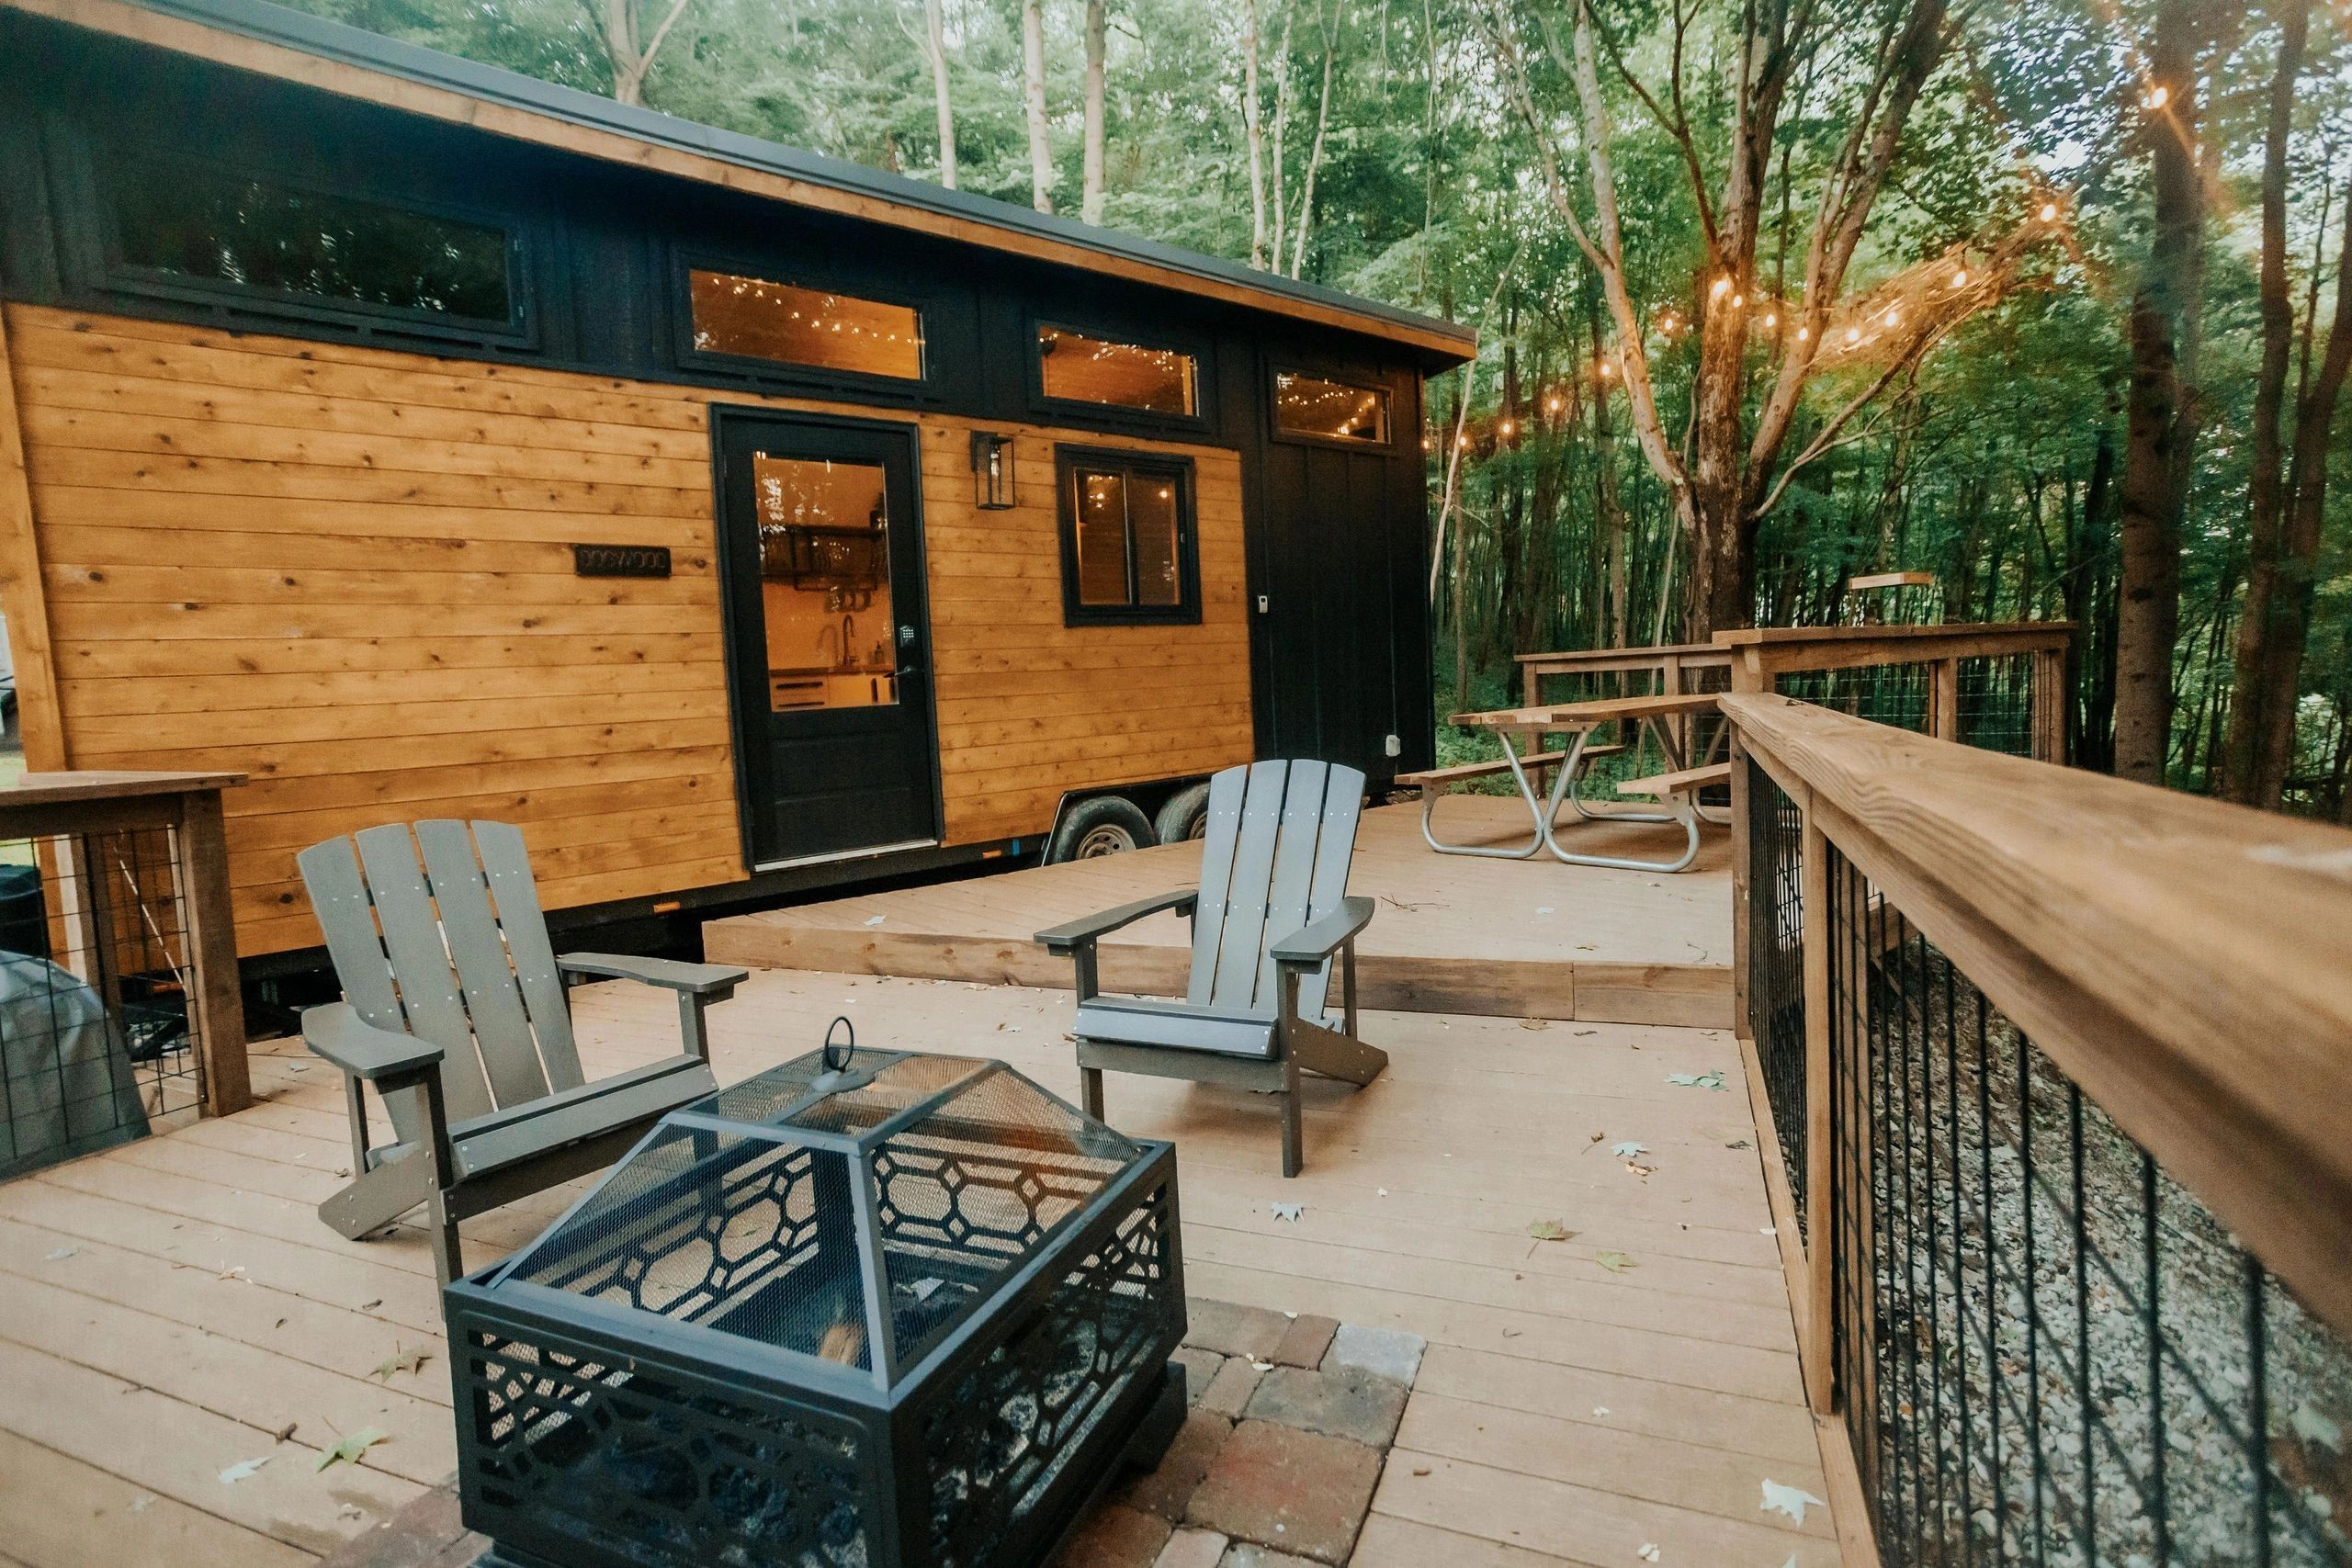 Tiny Houses For Sale In Ohio - Tiny Houses For Sale, Rent and